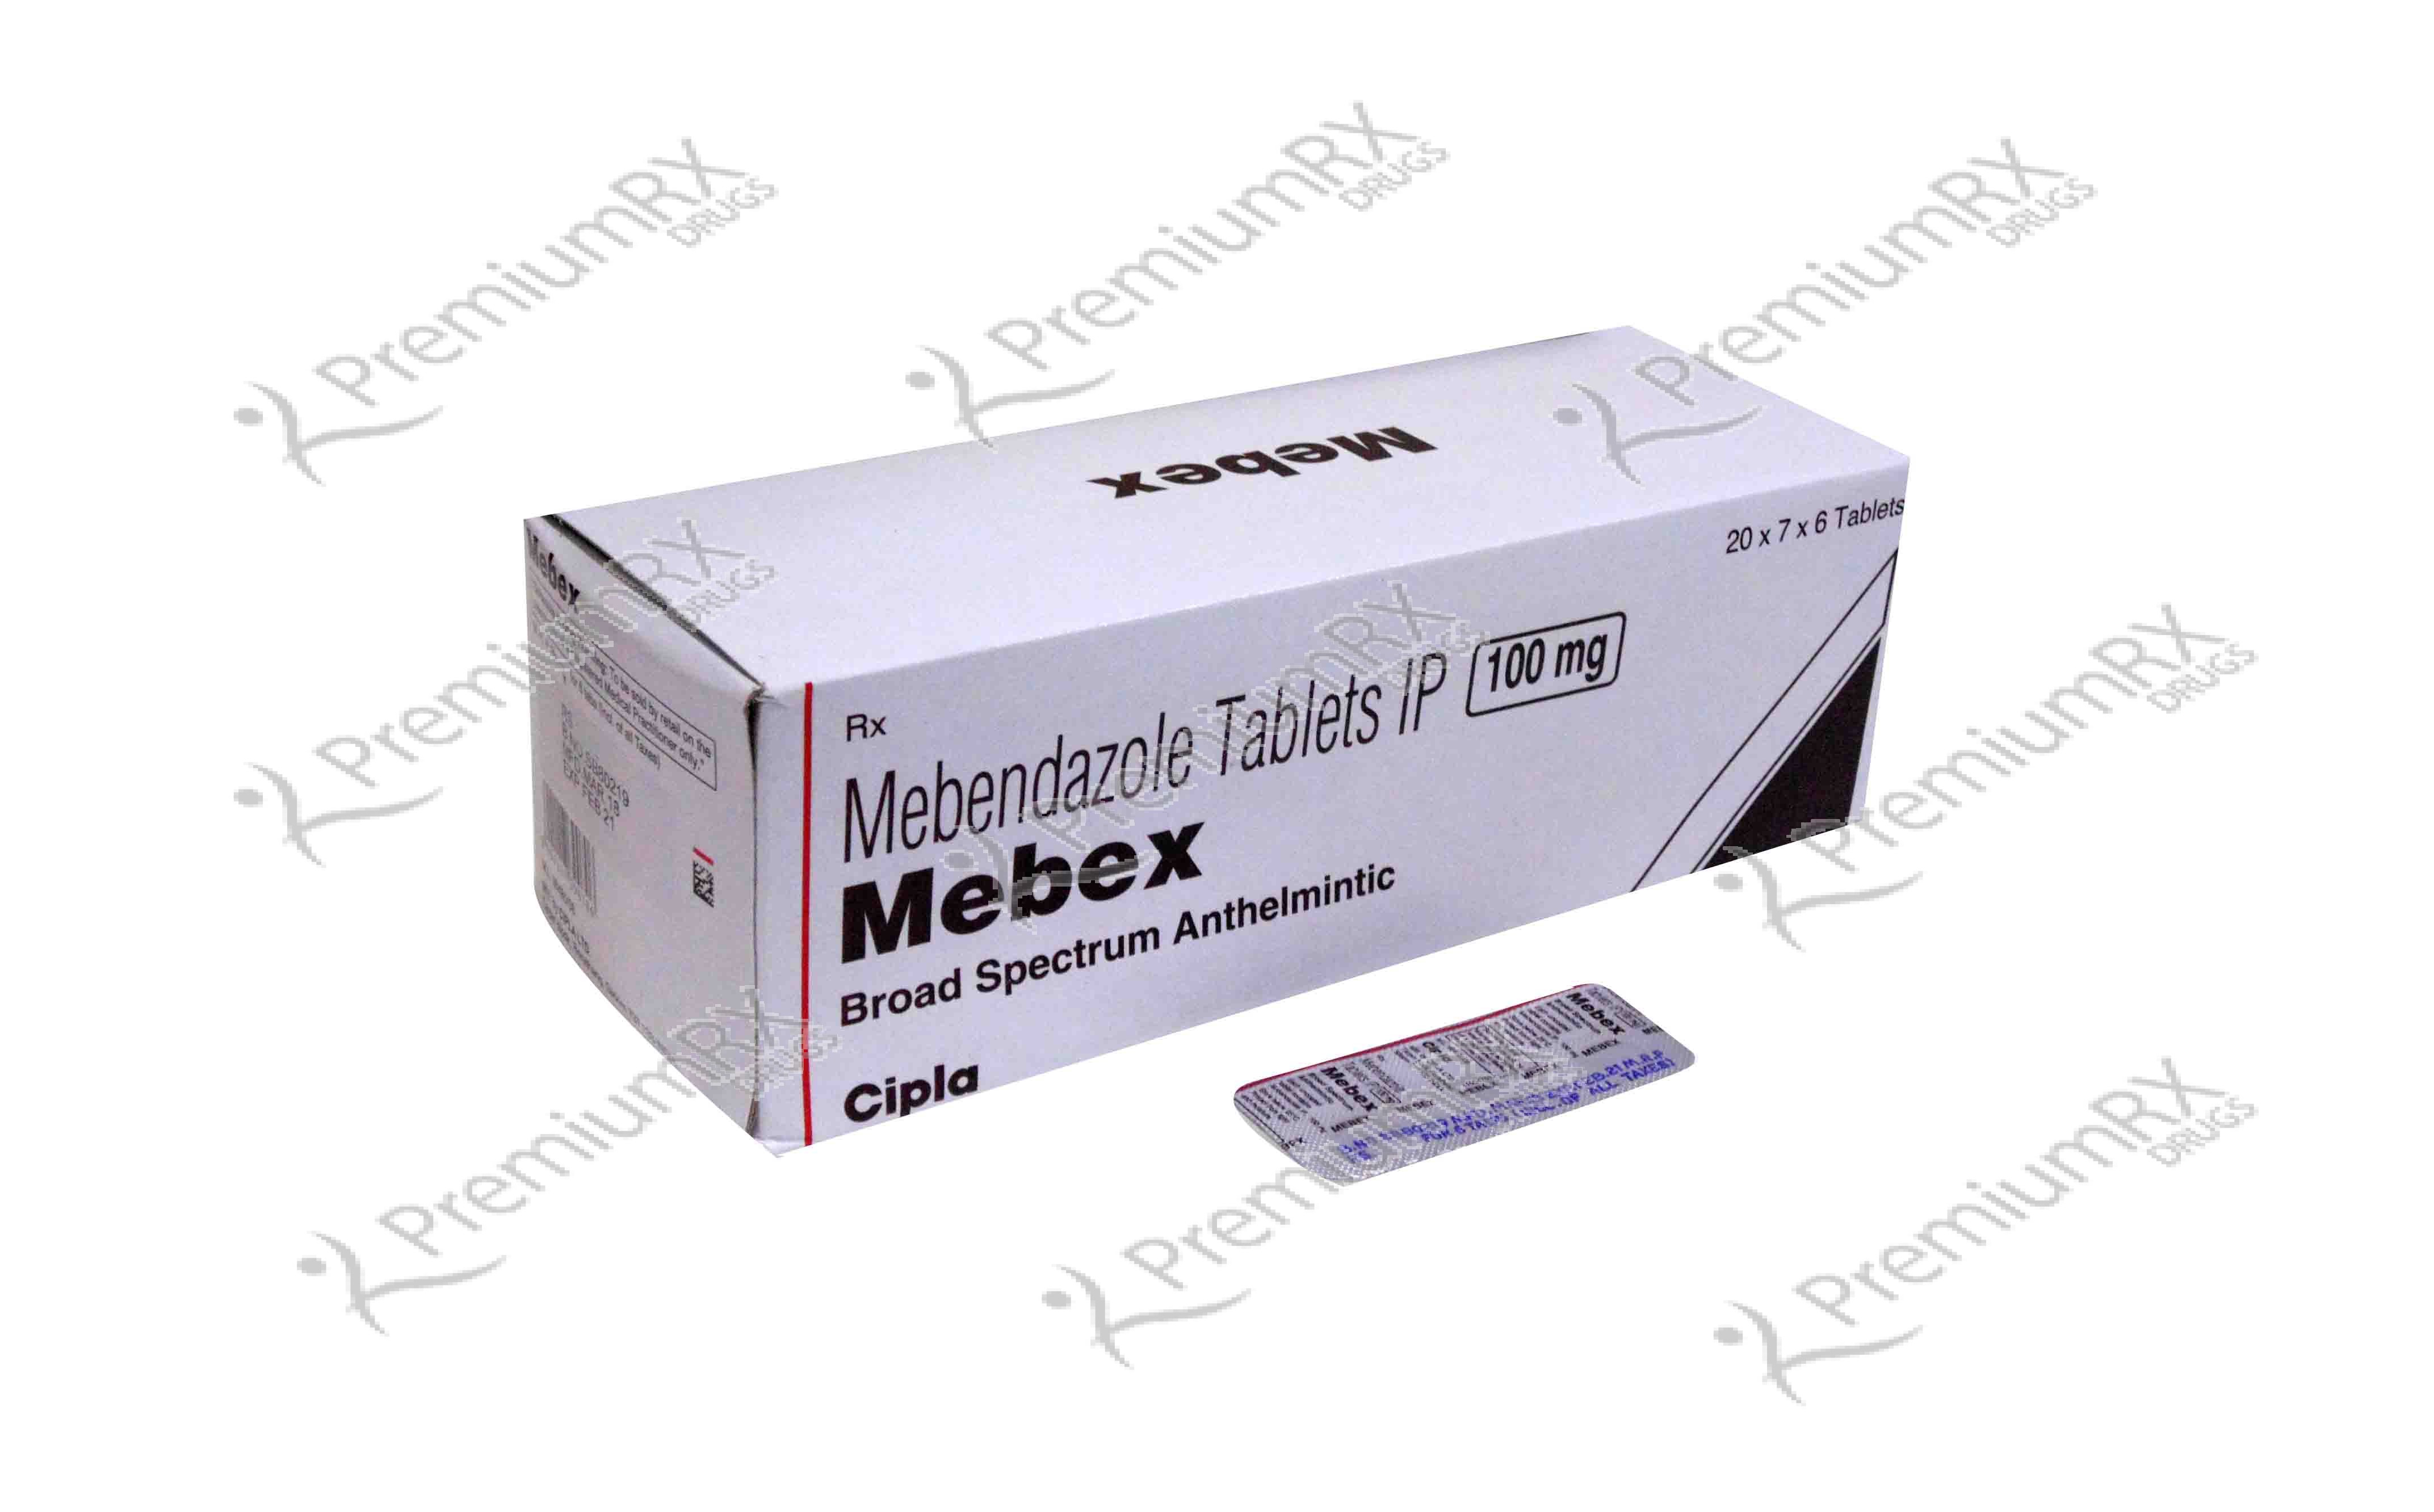 clomid tablet uses in hindi